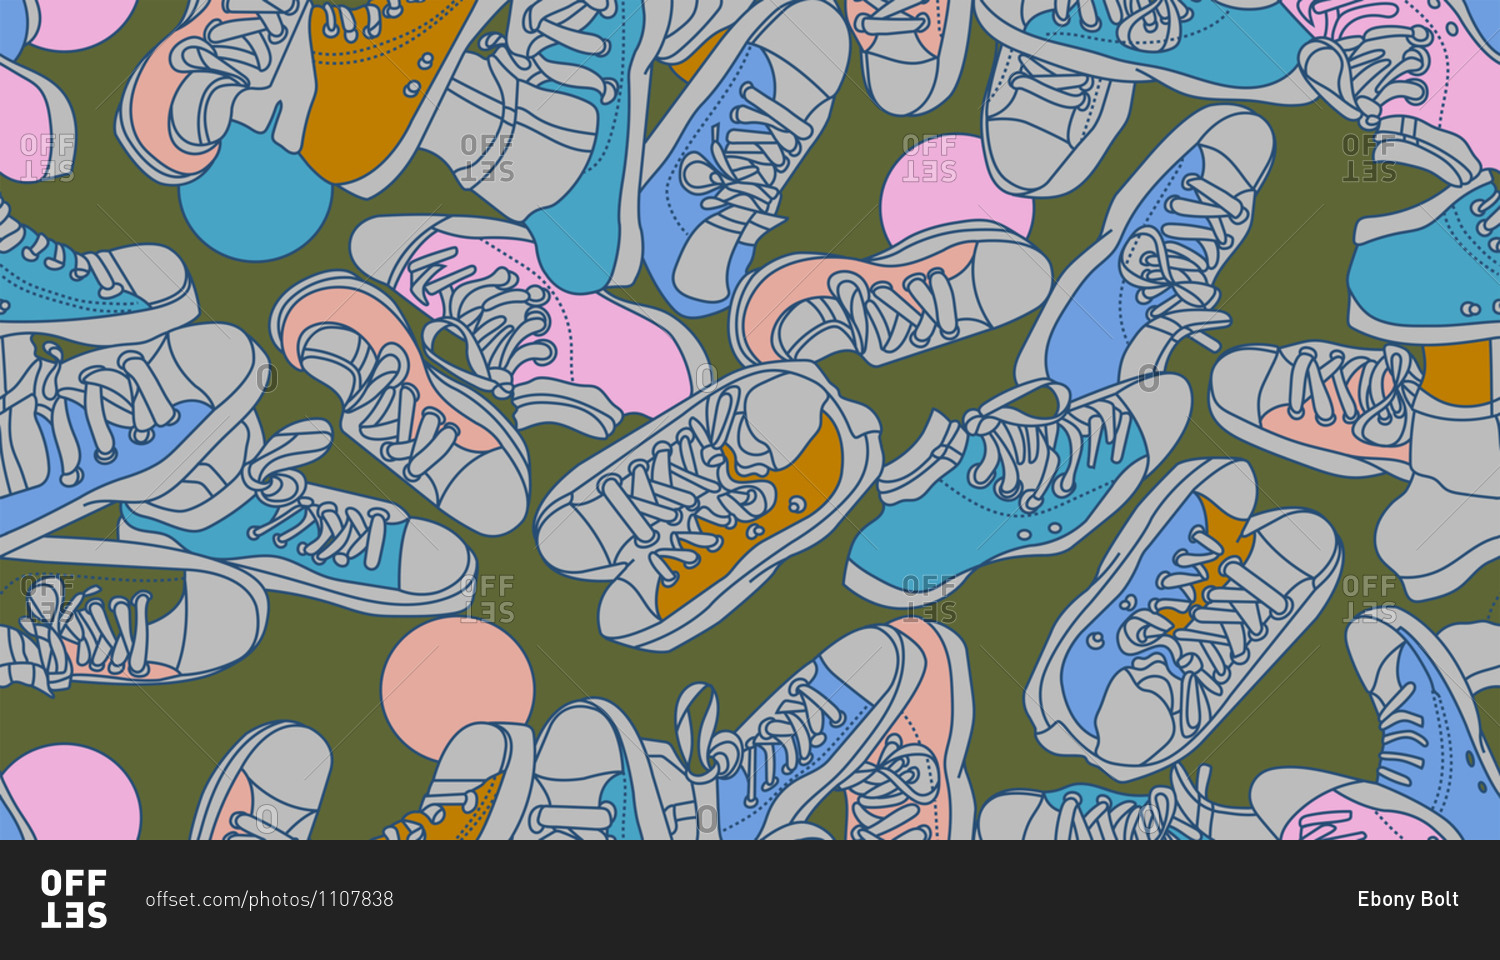 Horizontal digital illustration of several sneakers isolated
on an olive green colored background stock photo - OFFSET